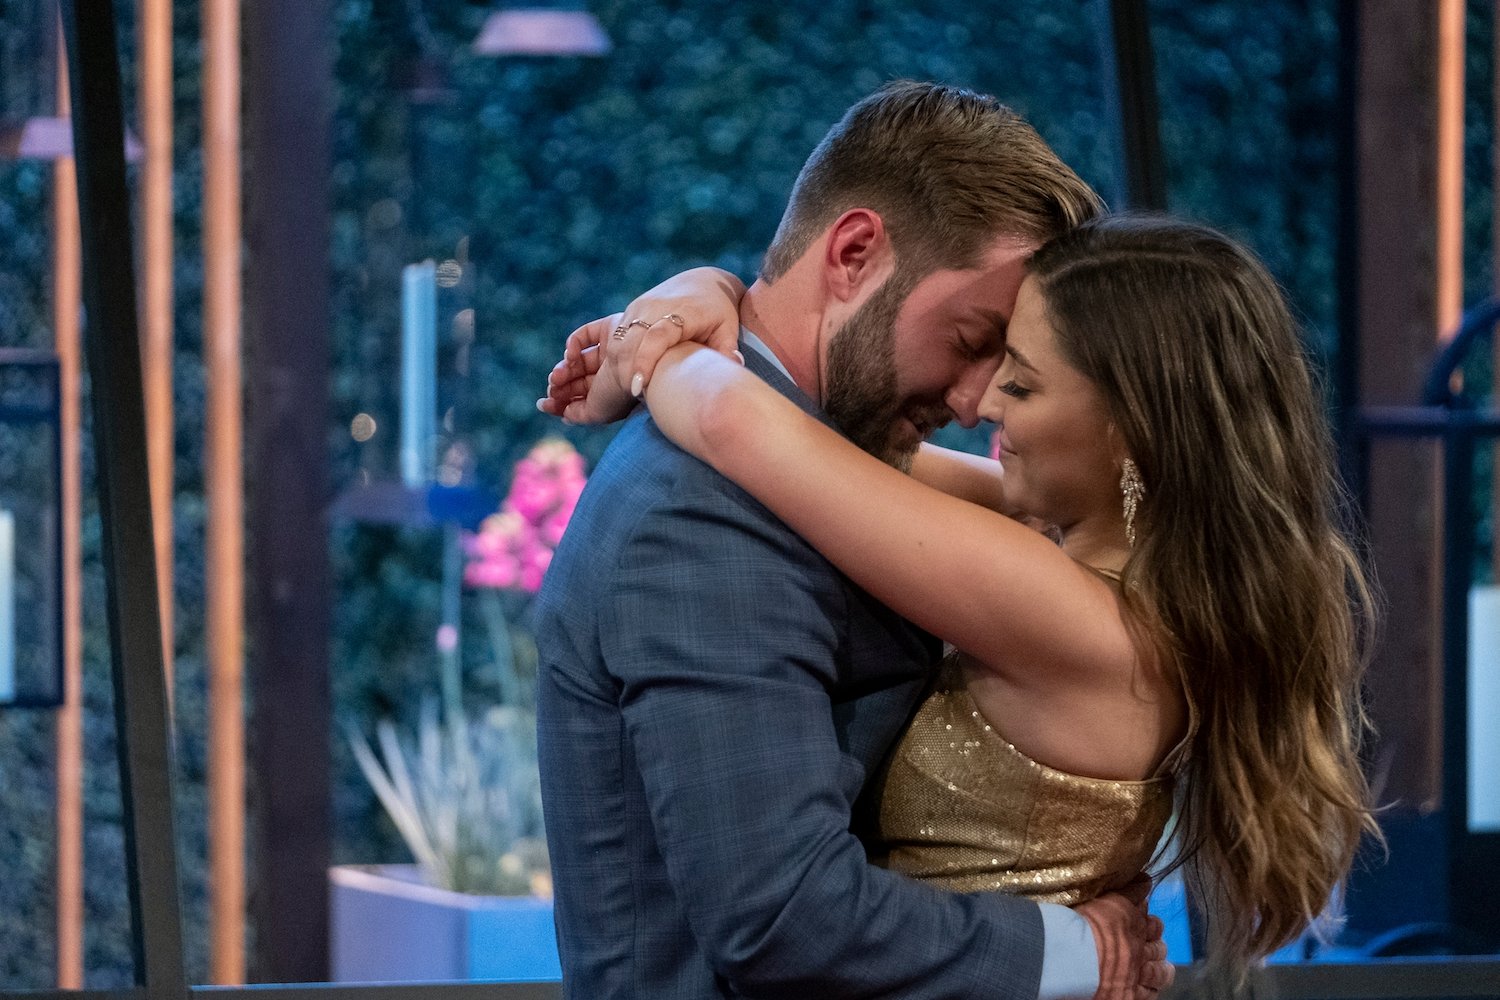 'Love Is Blind' couple Matt and Colleen hug after seeing each other in person for the first time. Do Matt and Colleen get married in season 3?